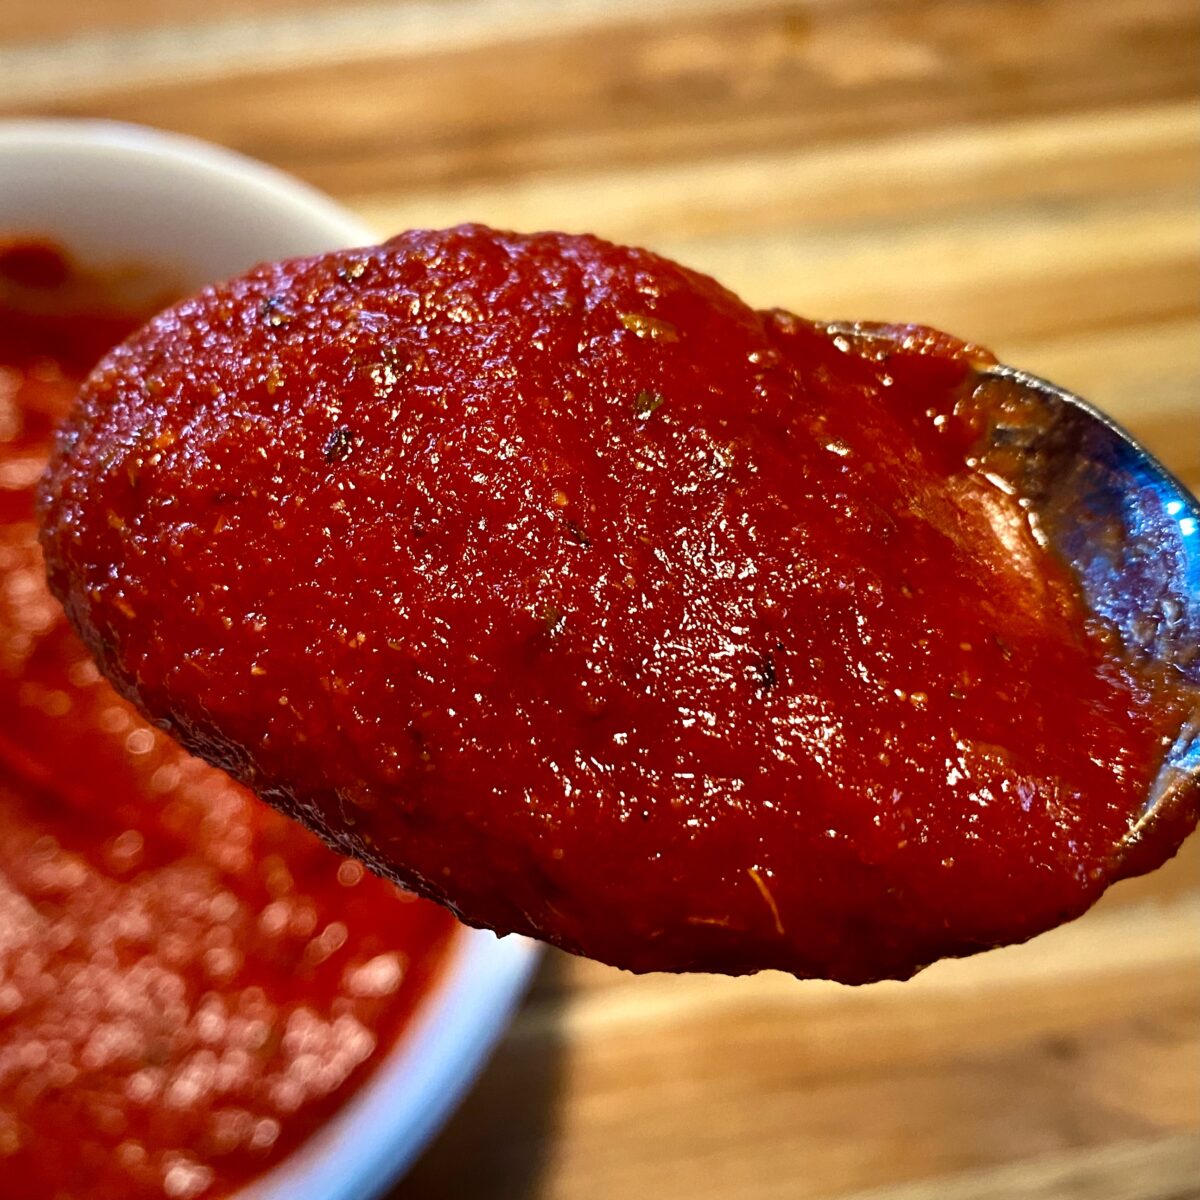 Close up view of zesty pizza sauce on a spoon showing the herbs and spices.